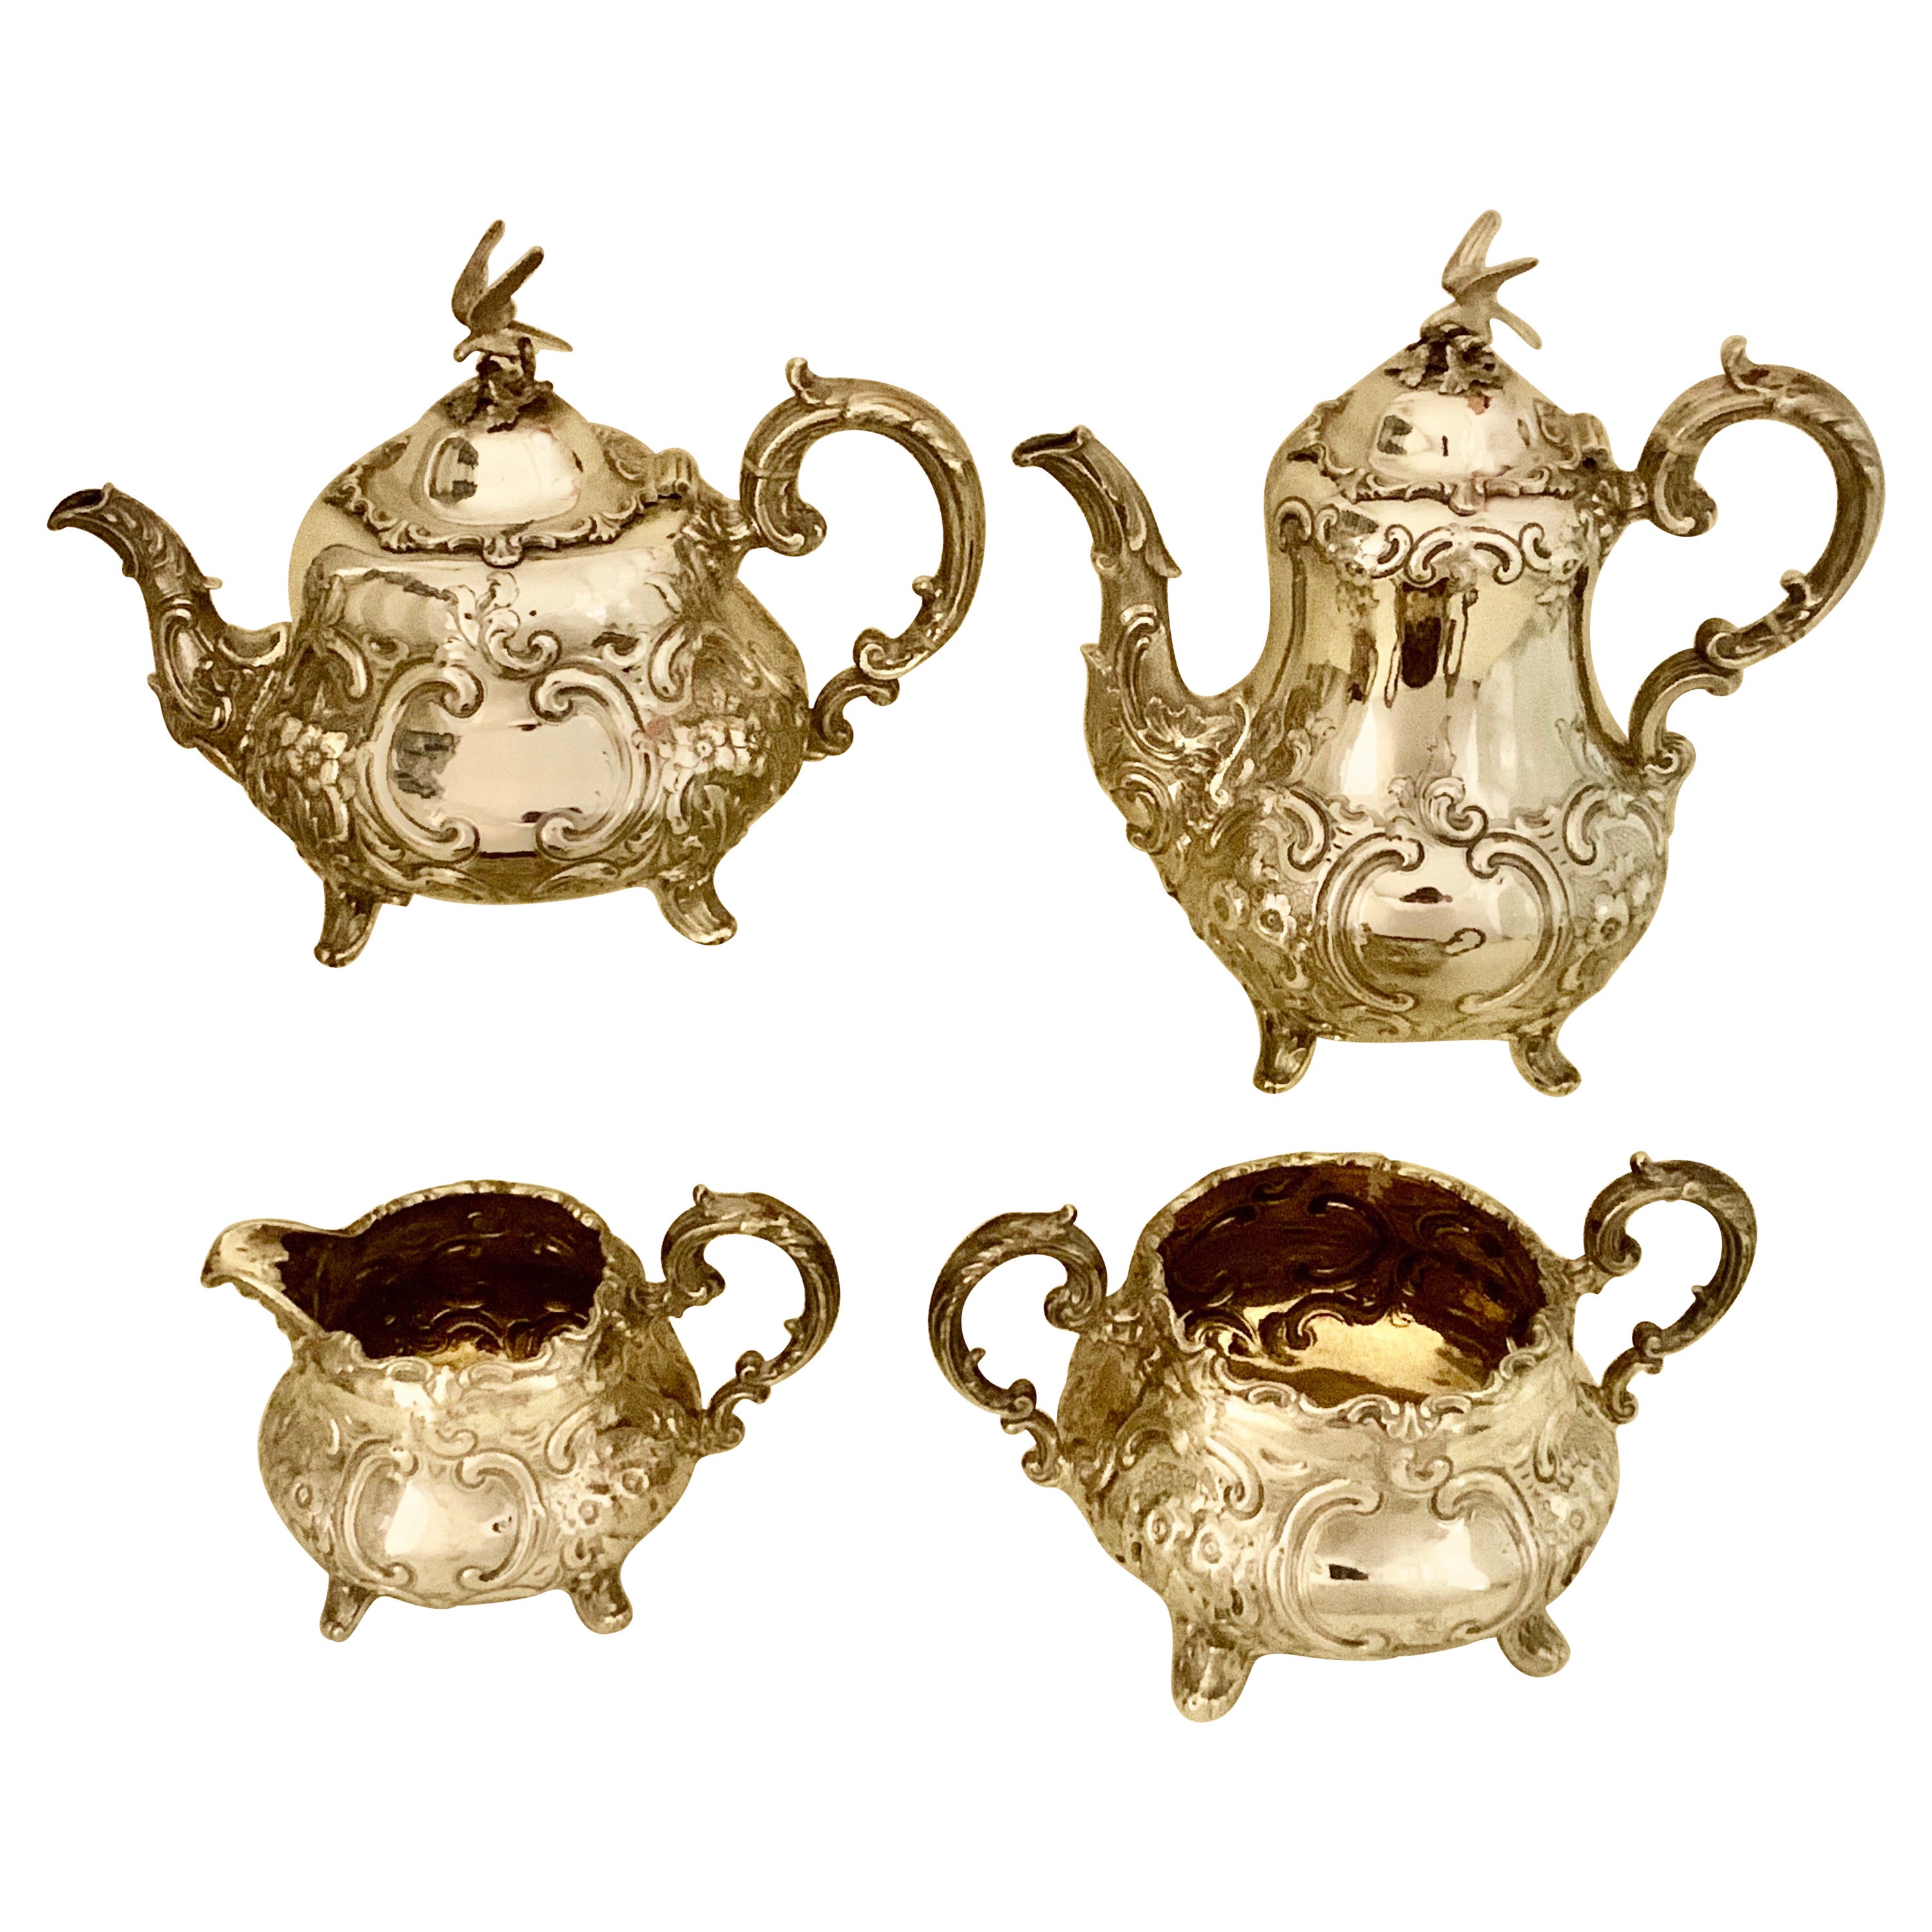 Victorian Sterling Silver Tea and Coffee Service by william Smiley, London, 1860